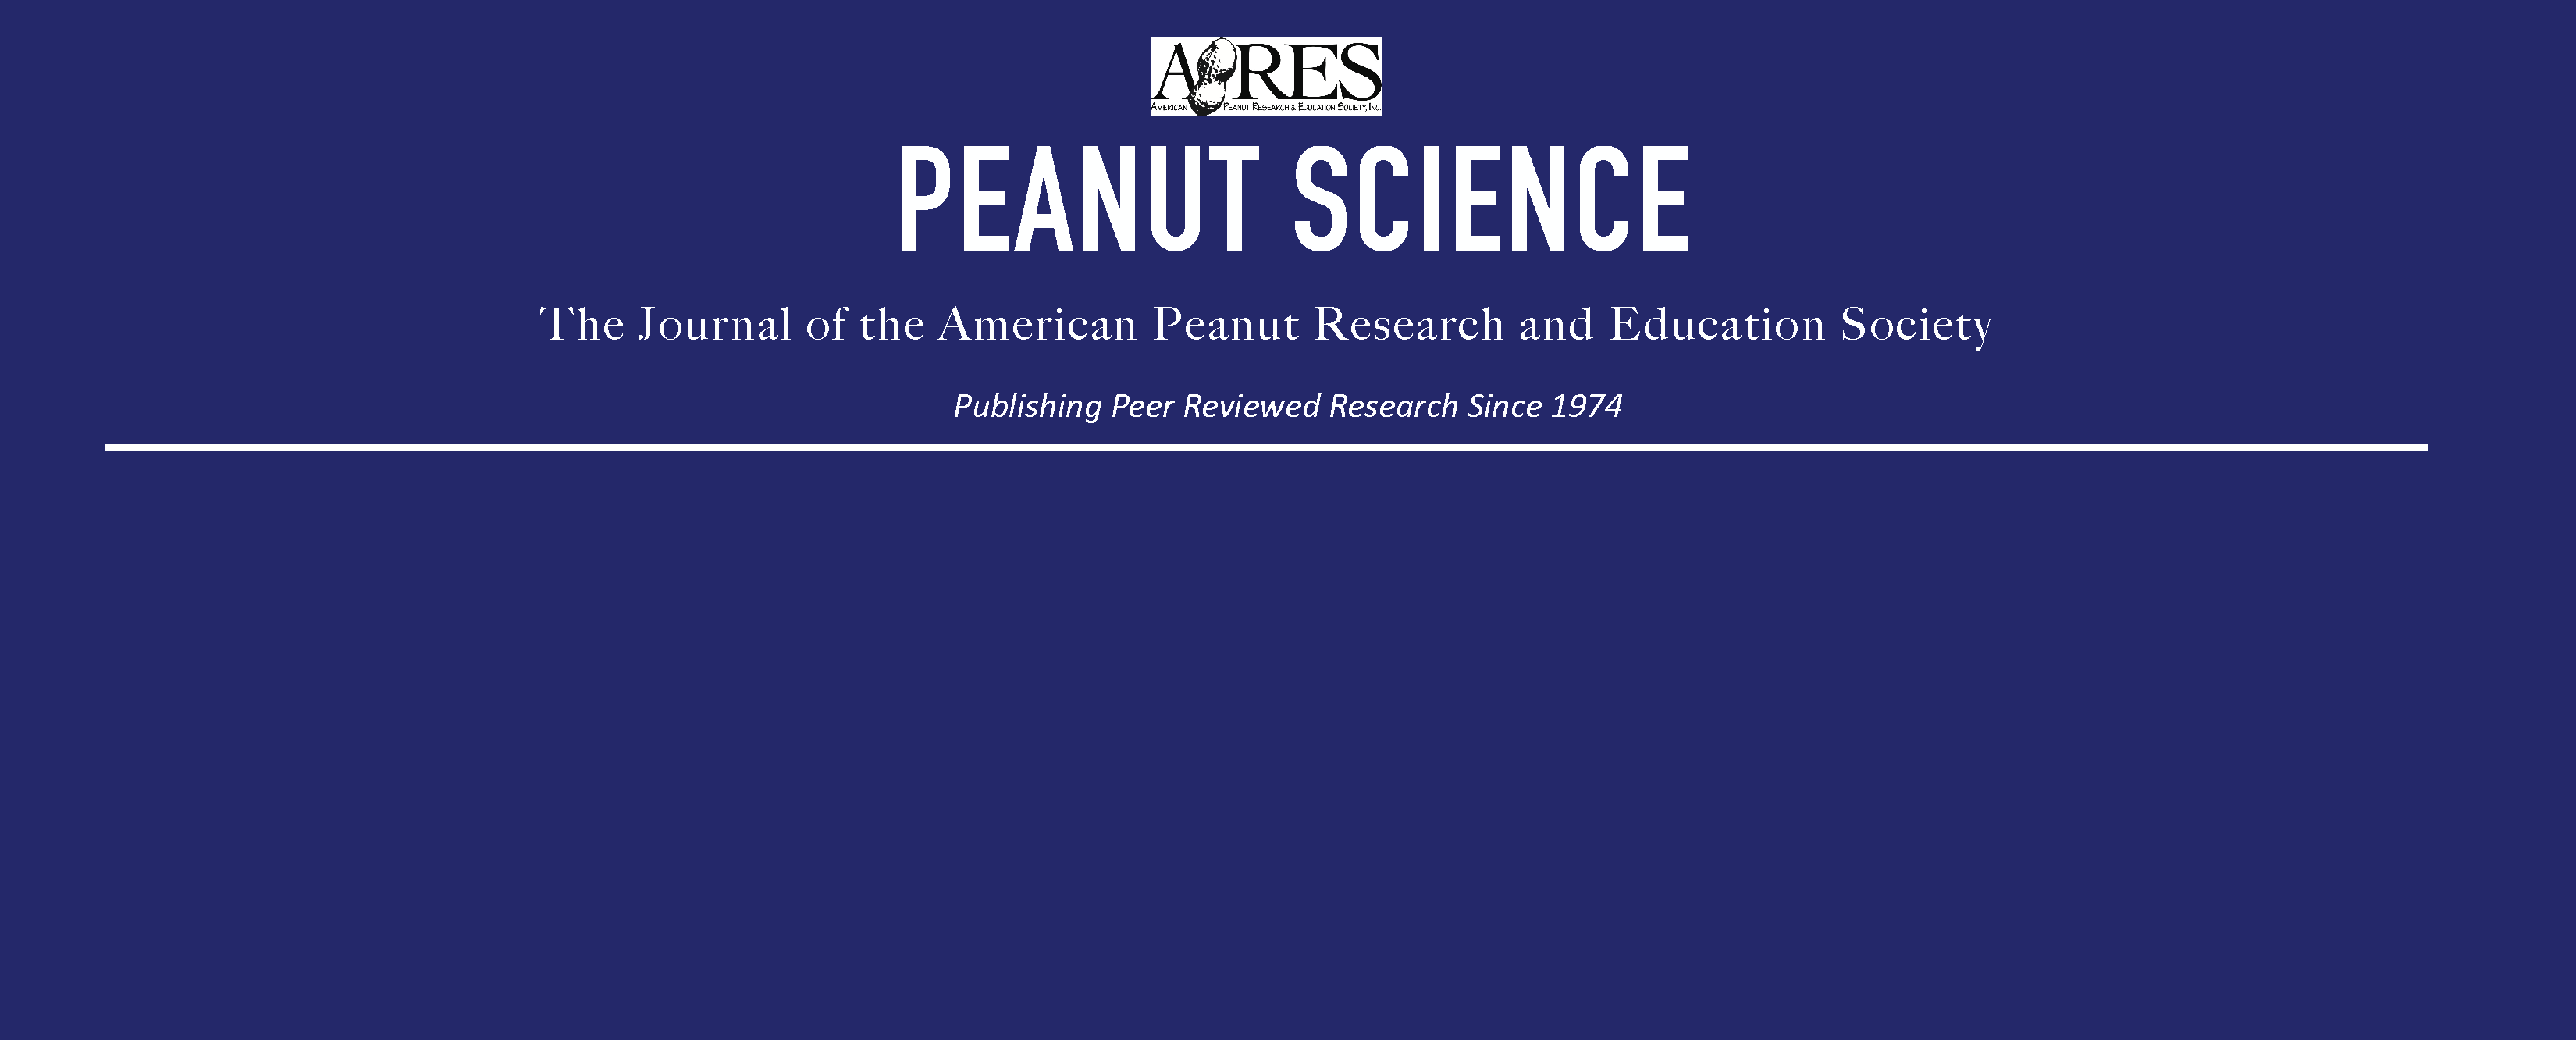 Plant Recovery from Embryonic Axes of Deteriorated Peanut Seed for Germplasm Renewal¹